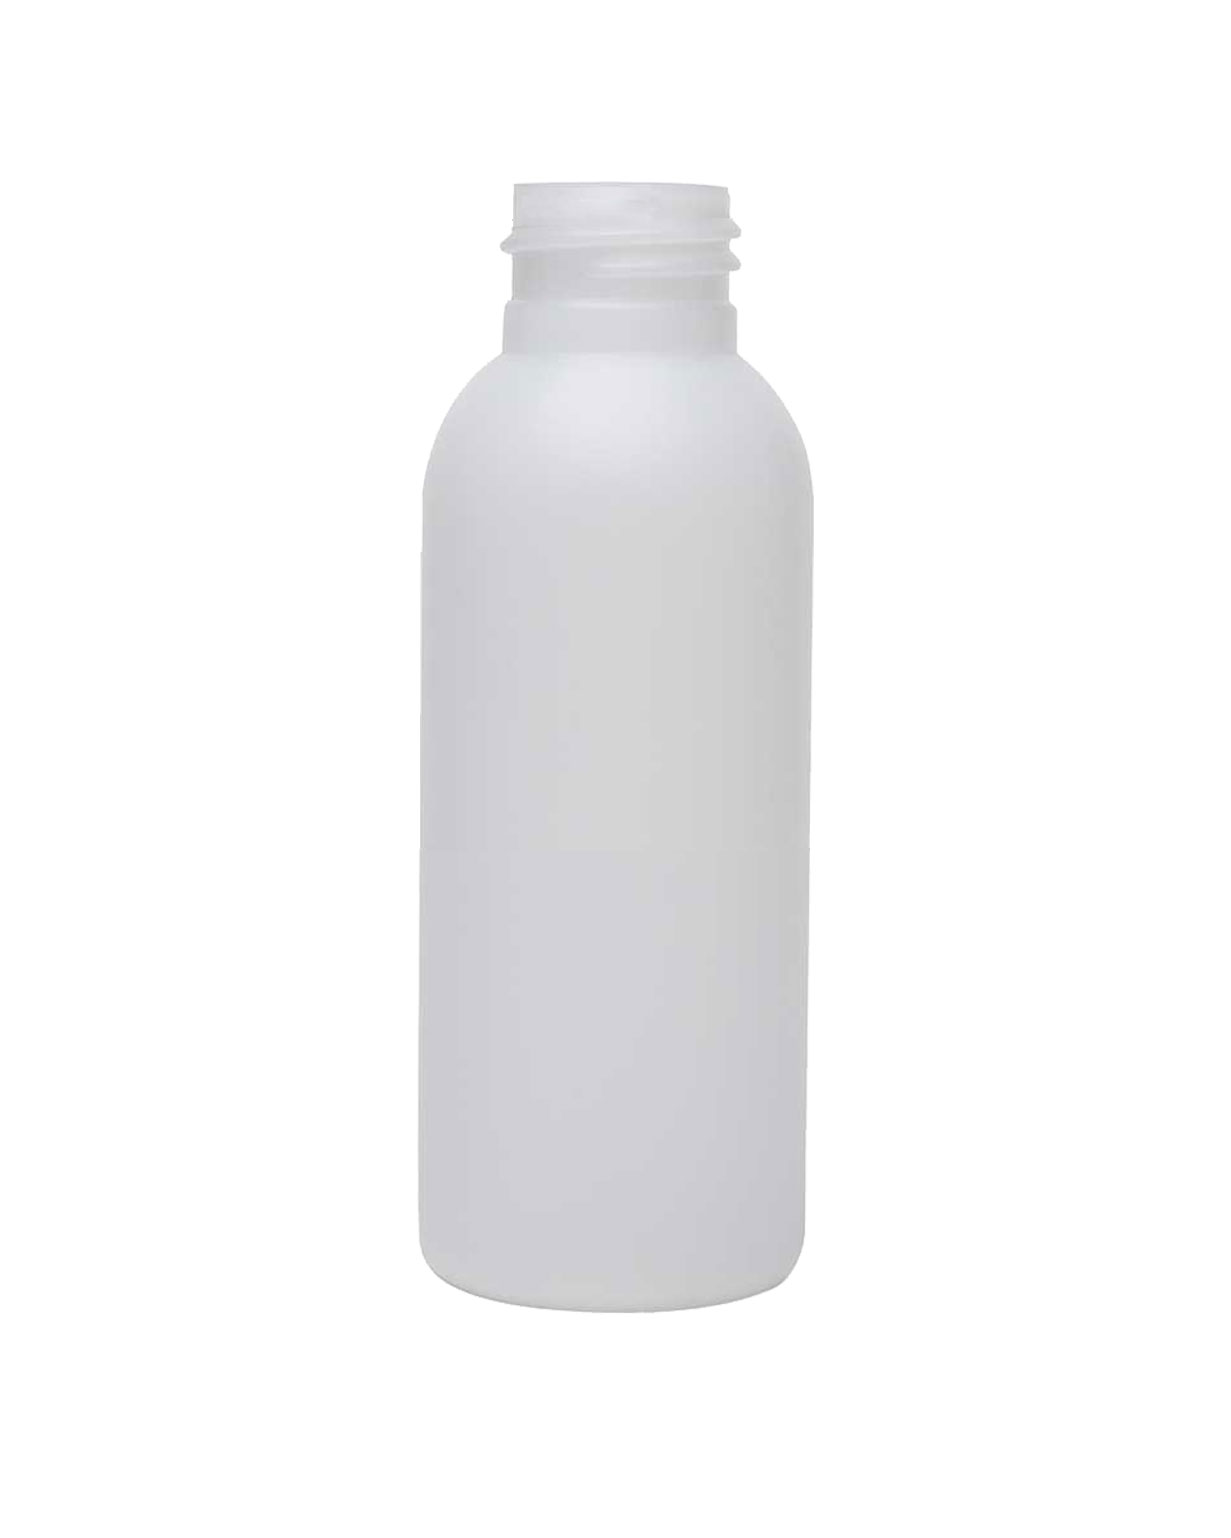 2oz 20-410 natural imperial cosmo round bottle